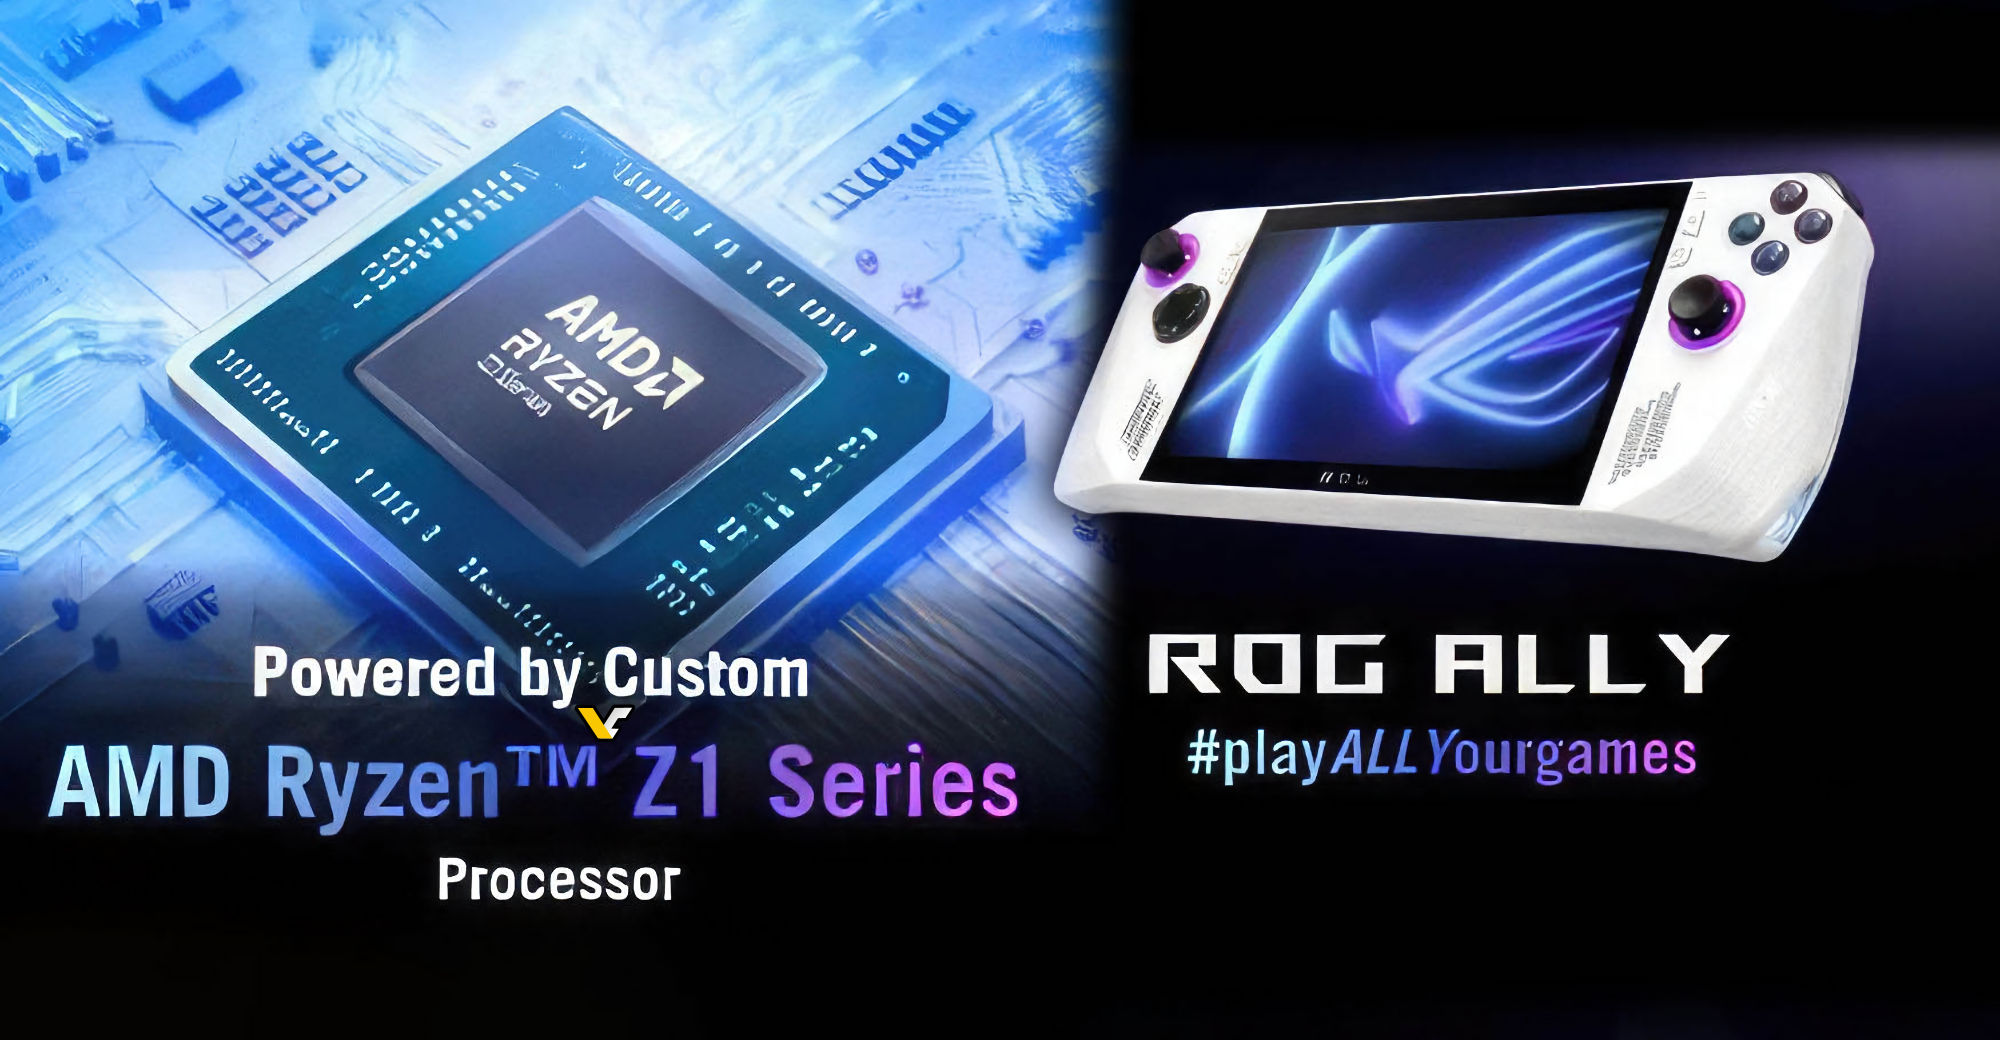 ASUS ROG Ally packs AMD's new Z1 chip and launches May 11